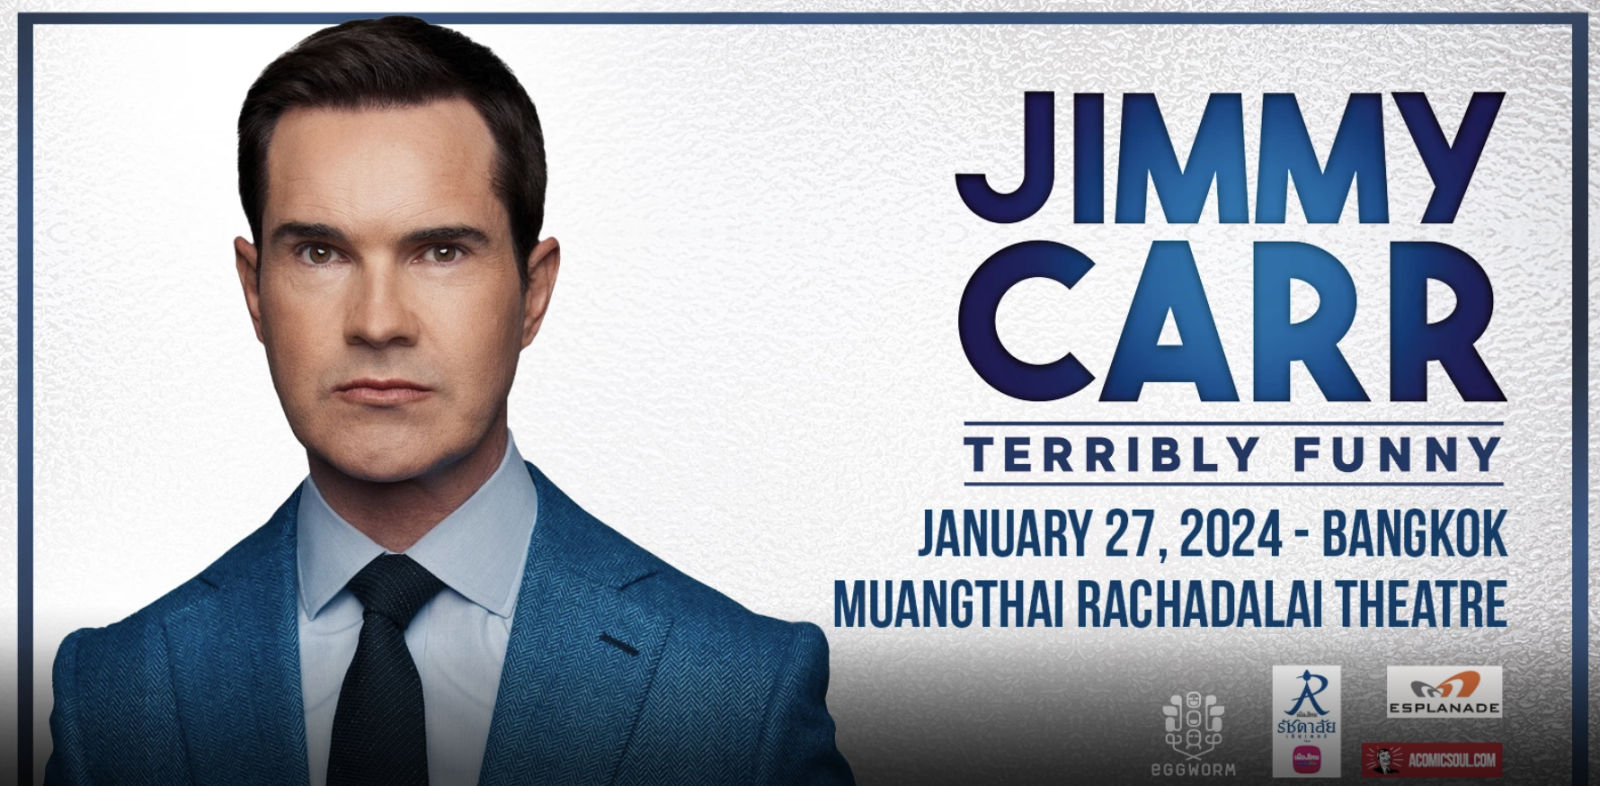 Jimmy Carr is coming back to Bangkok in 2024